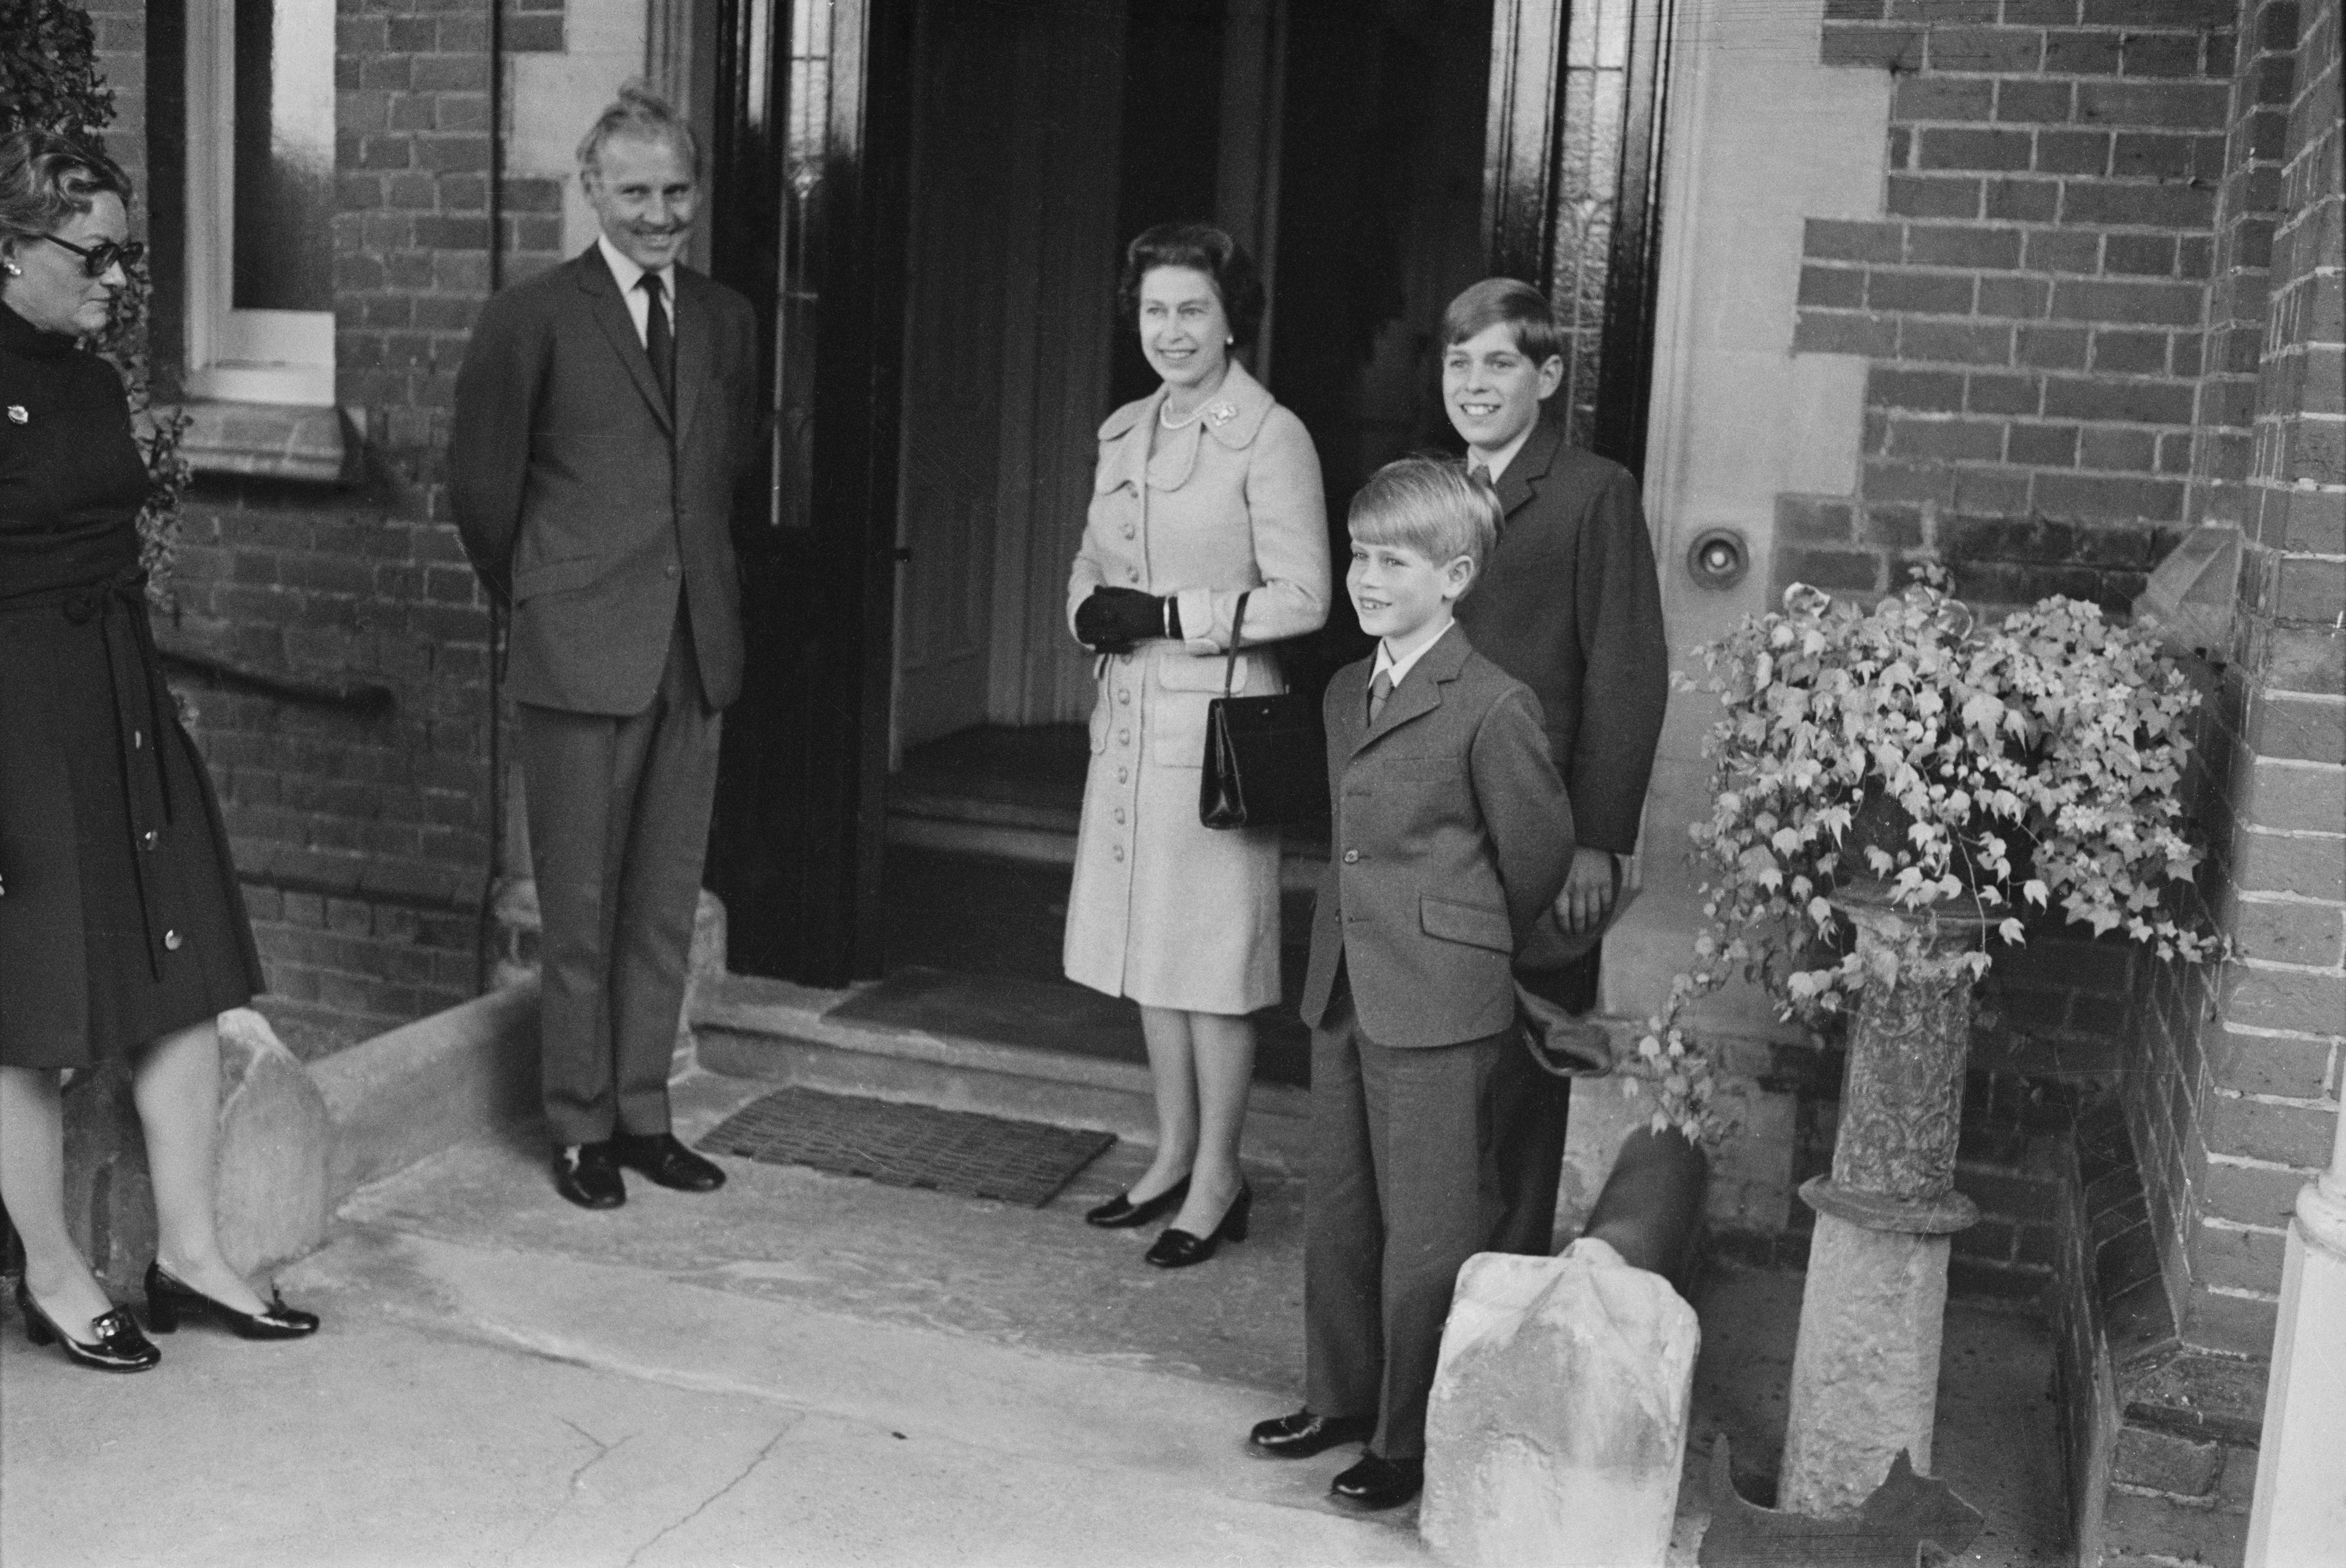 Queen Elizabeth II pictured with her sons Prince Andrew (behind) and Prince Edward as Prince Edward starts his first day at Heatherdown Preparatory School near Ascot, England on 16th September 1972